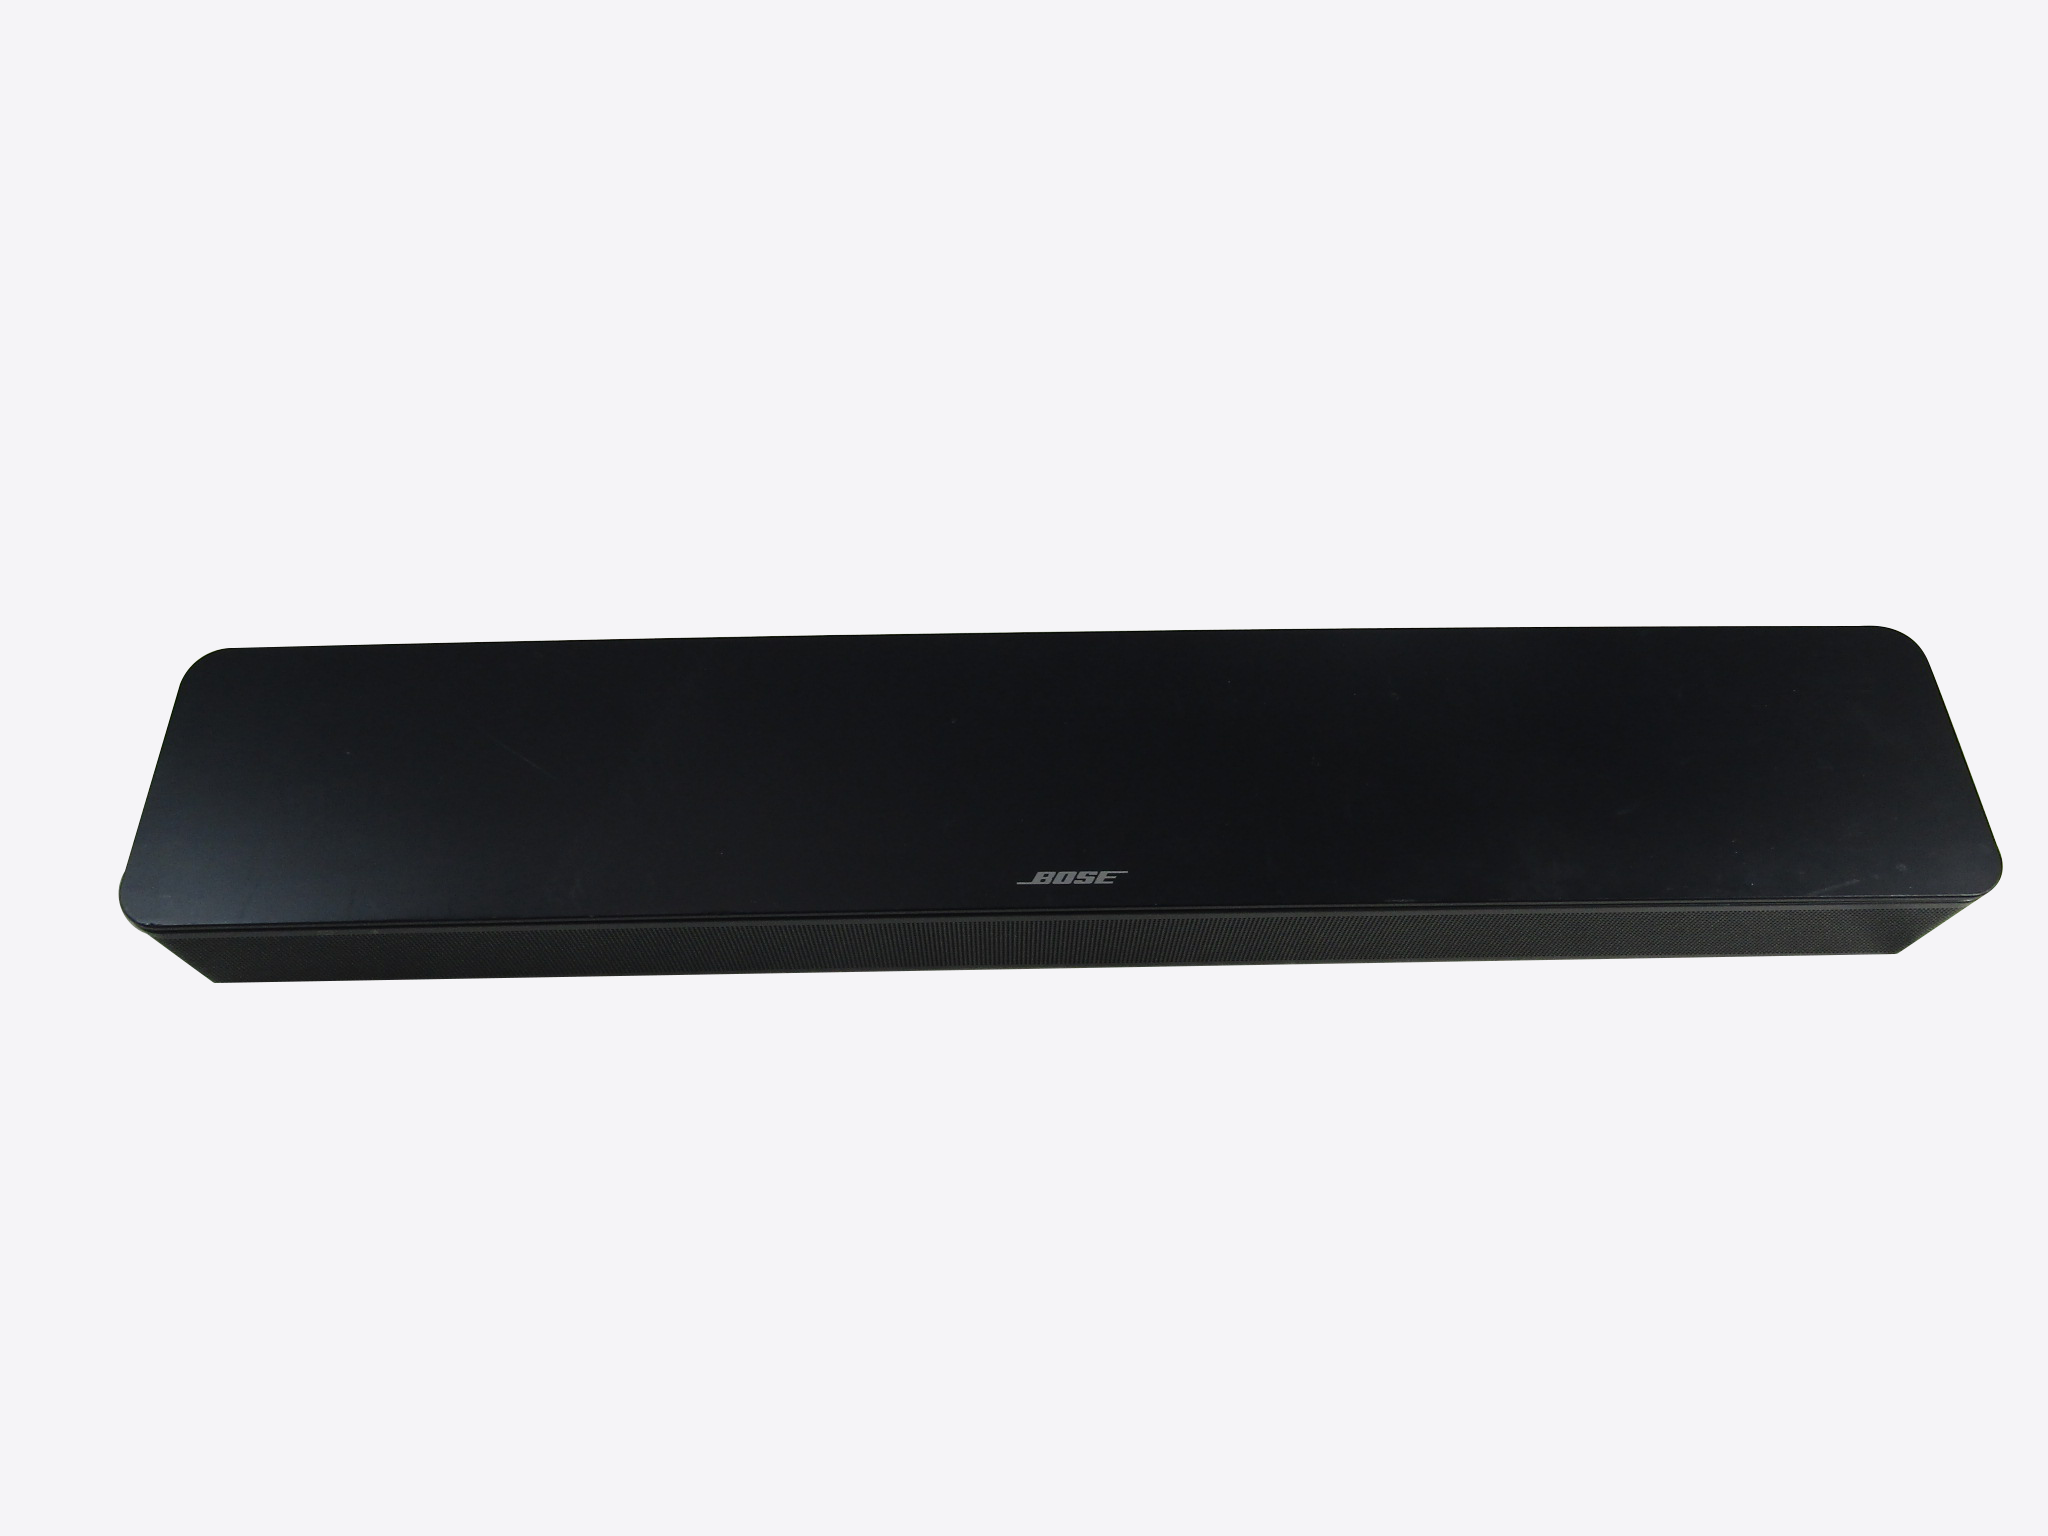 Bose TV Speaker- Small Soundbar with Bluetooth and HDMI-ARC Connectivity, Black, Includes Remote Control VG